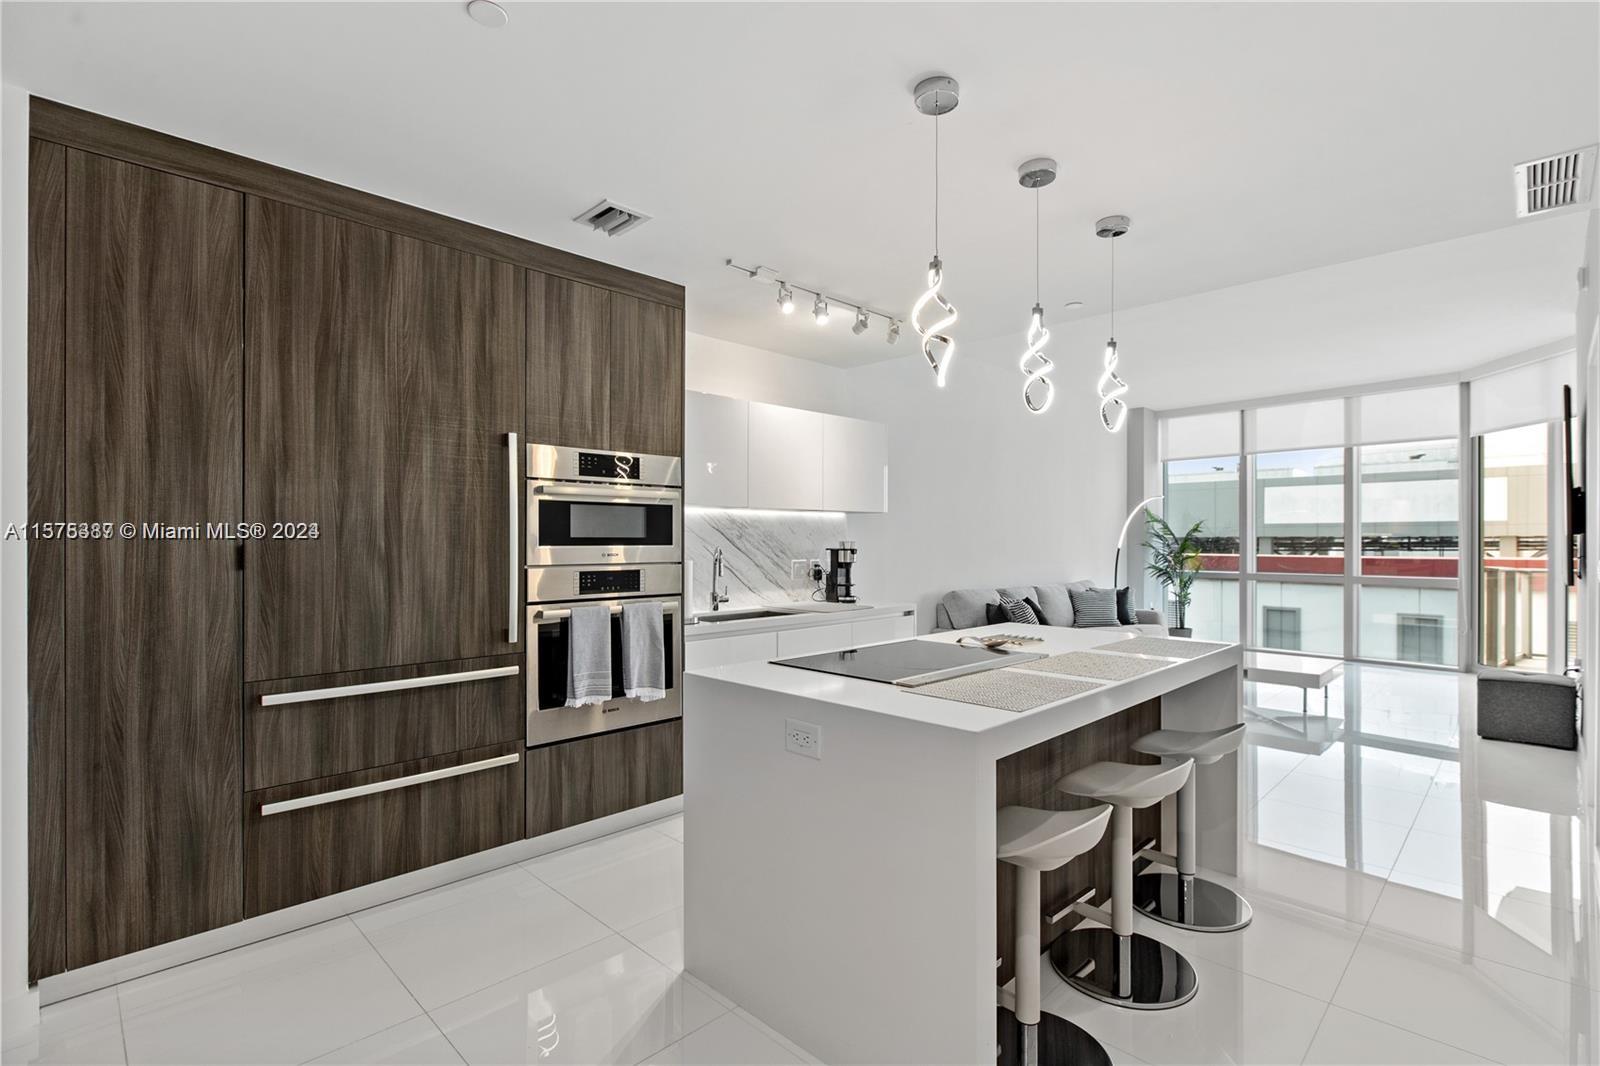 a kitchen that has a kitchen island wooden cabinets and stainless steel appliances